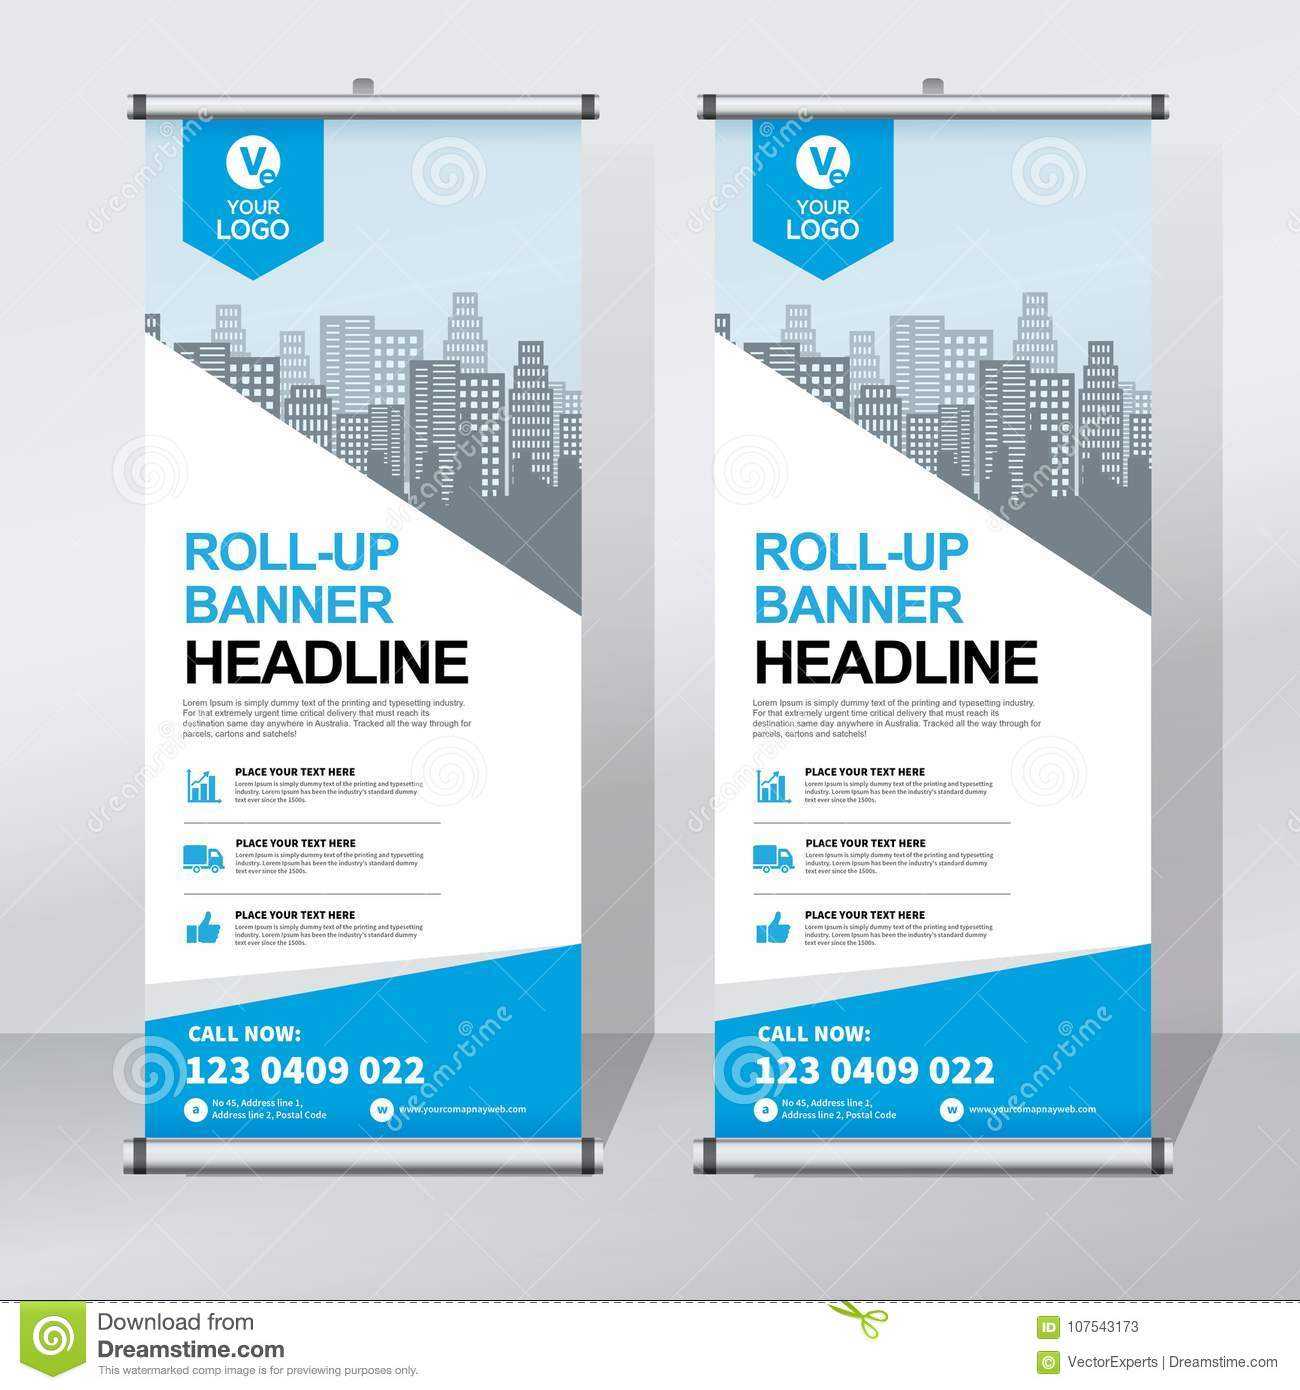 Retractable Banner Design Templates - Yeppe For Retractable Banner Design Templates